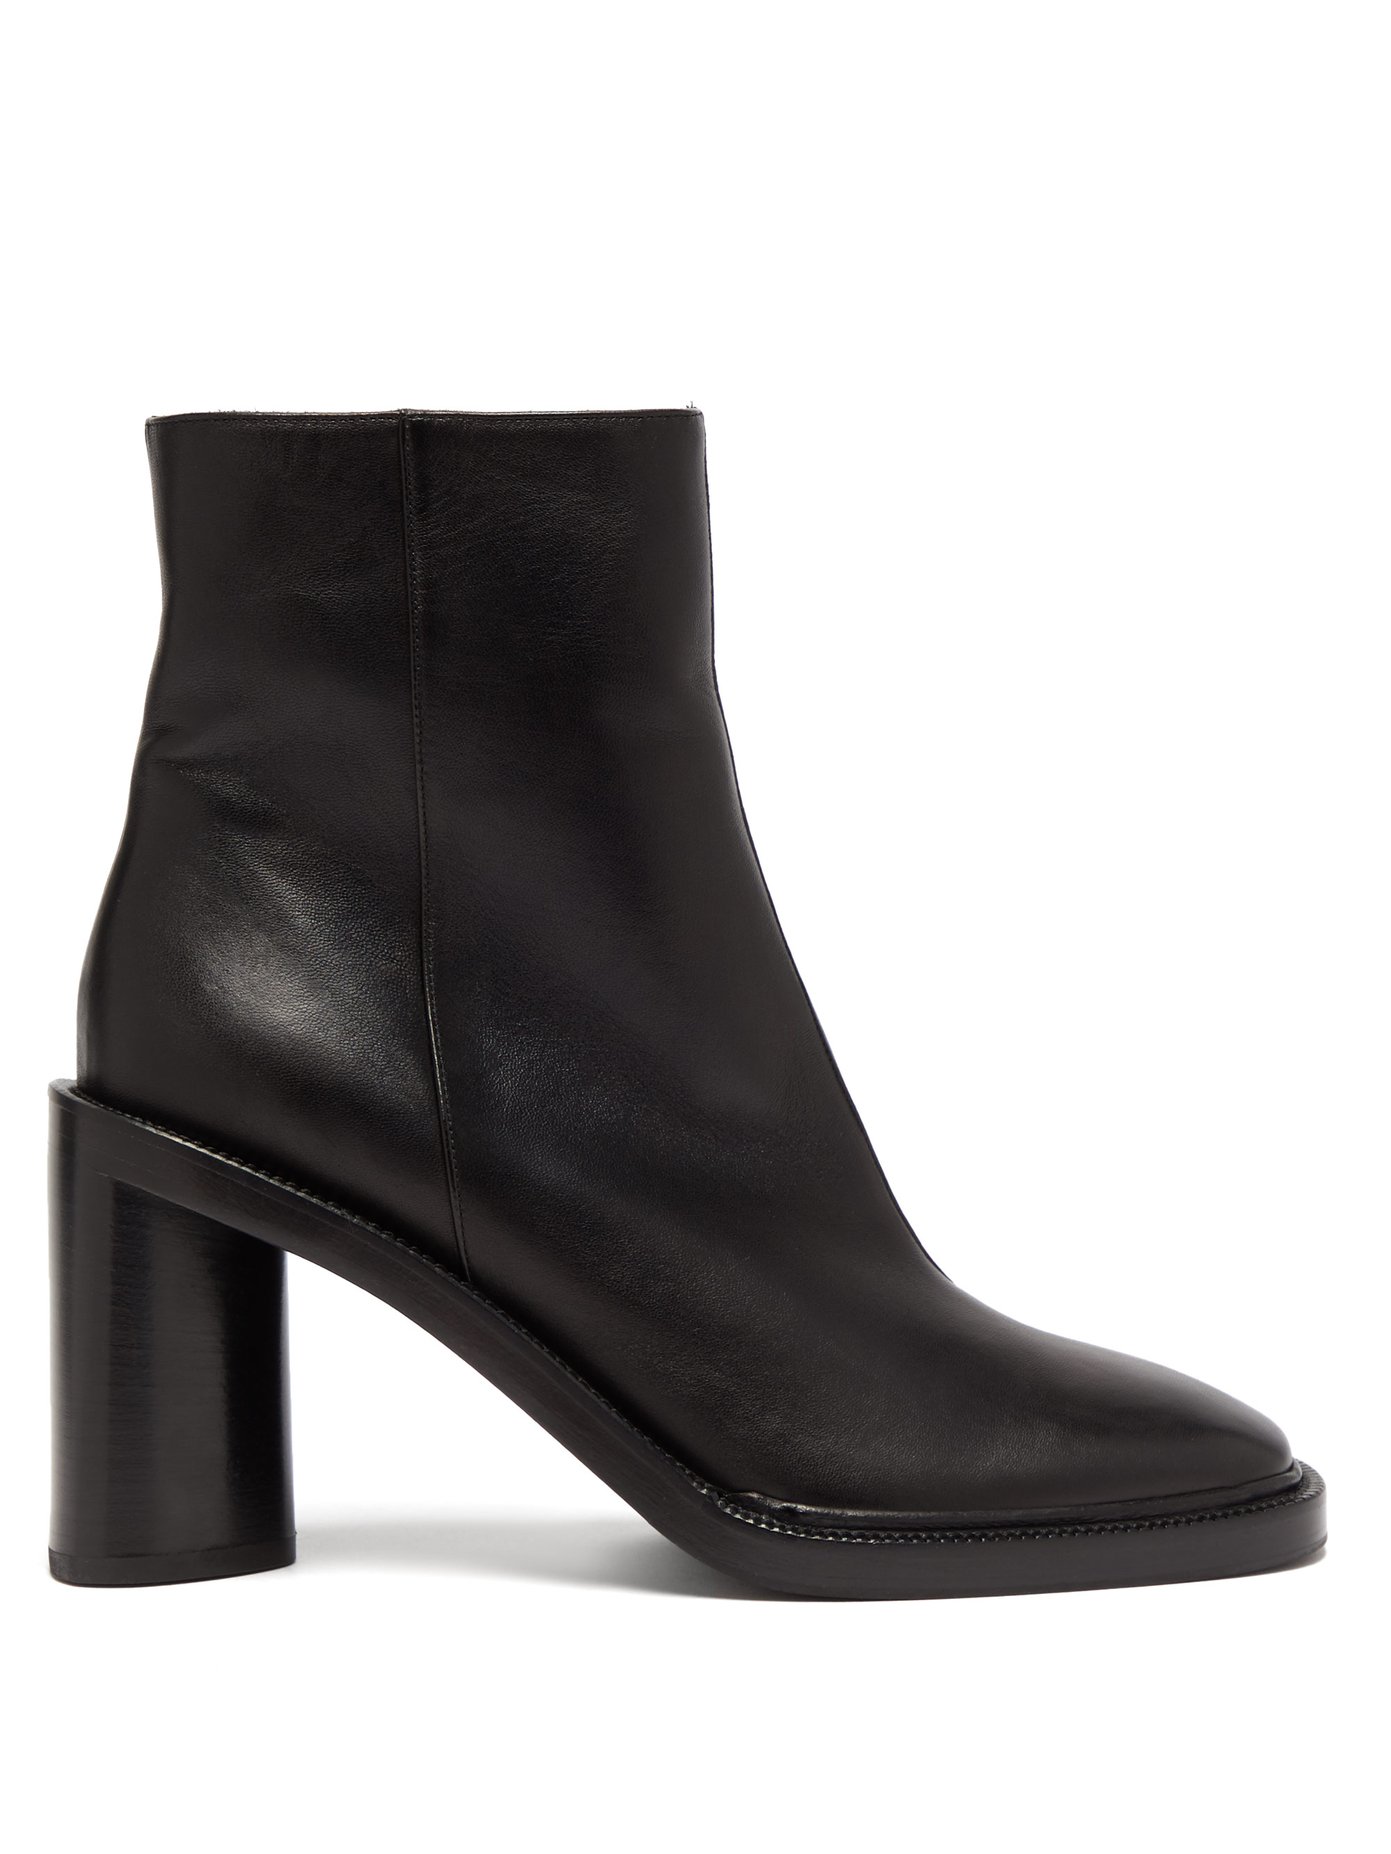 acne ankle boots